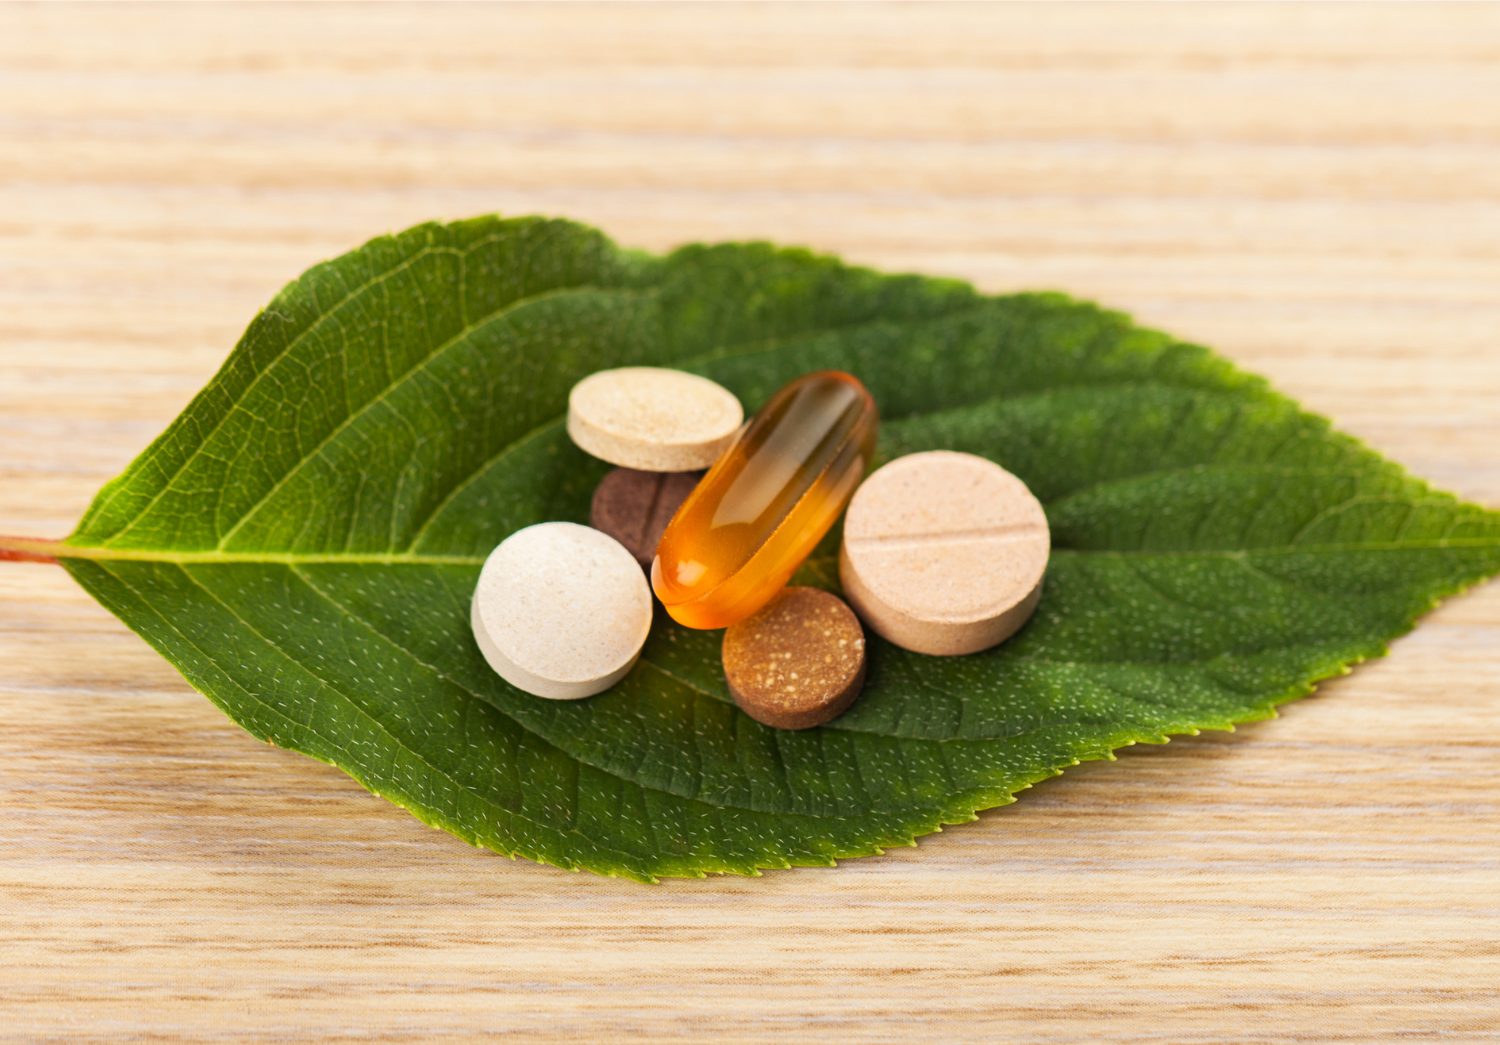 Vitamins & Supplements: Do You Need Them?